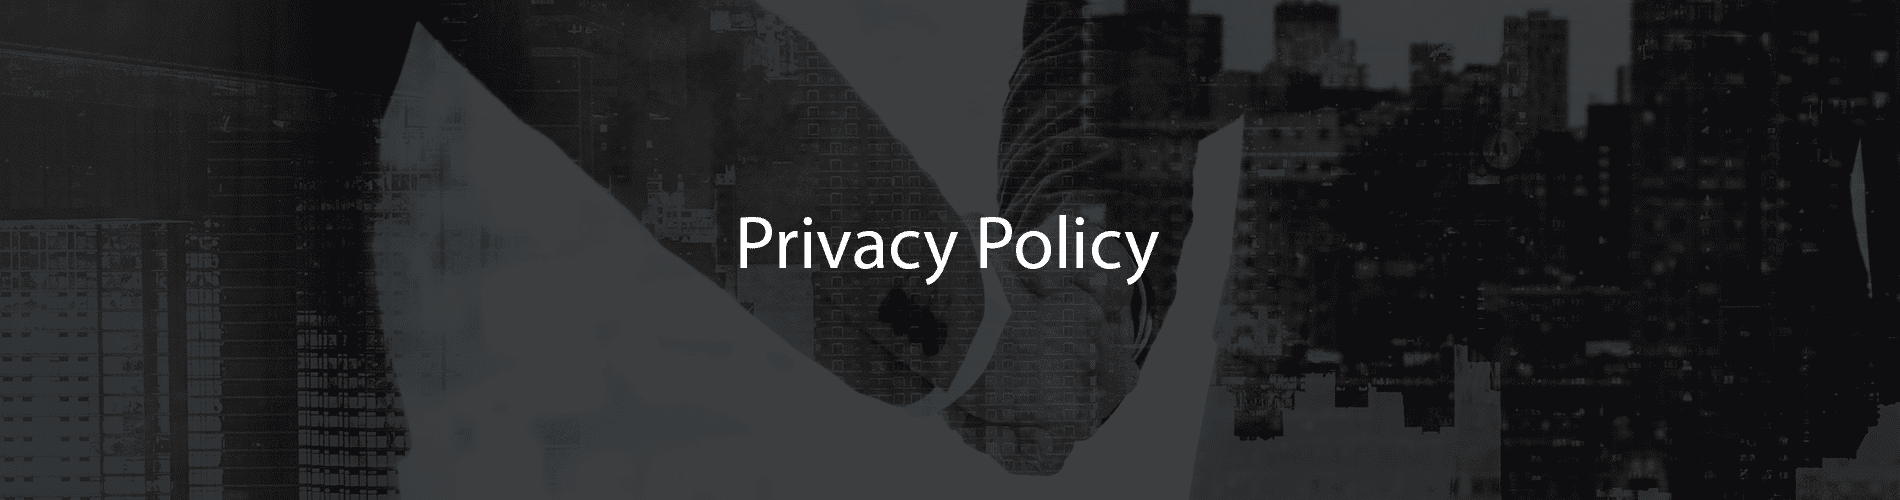 Legacy Networks Privacy Policy